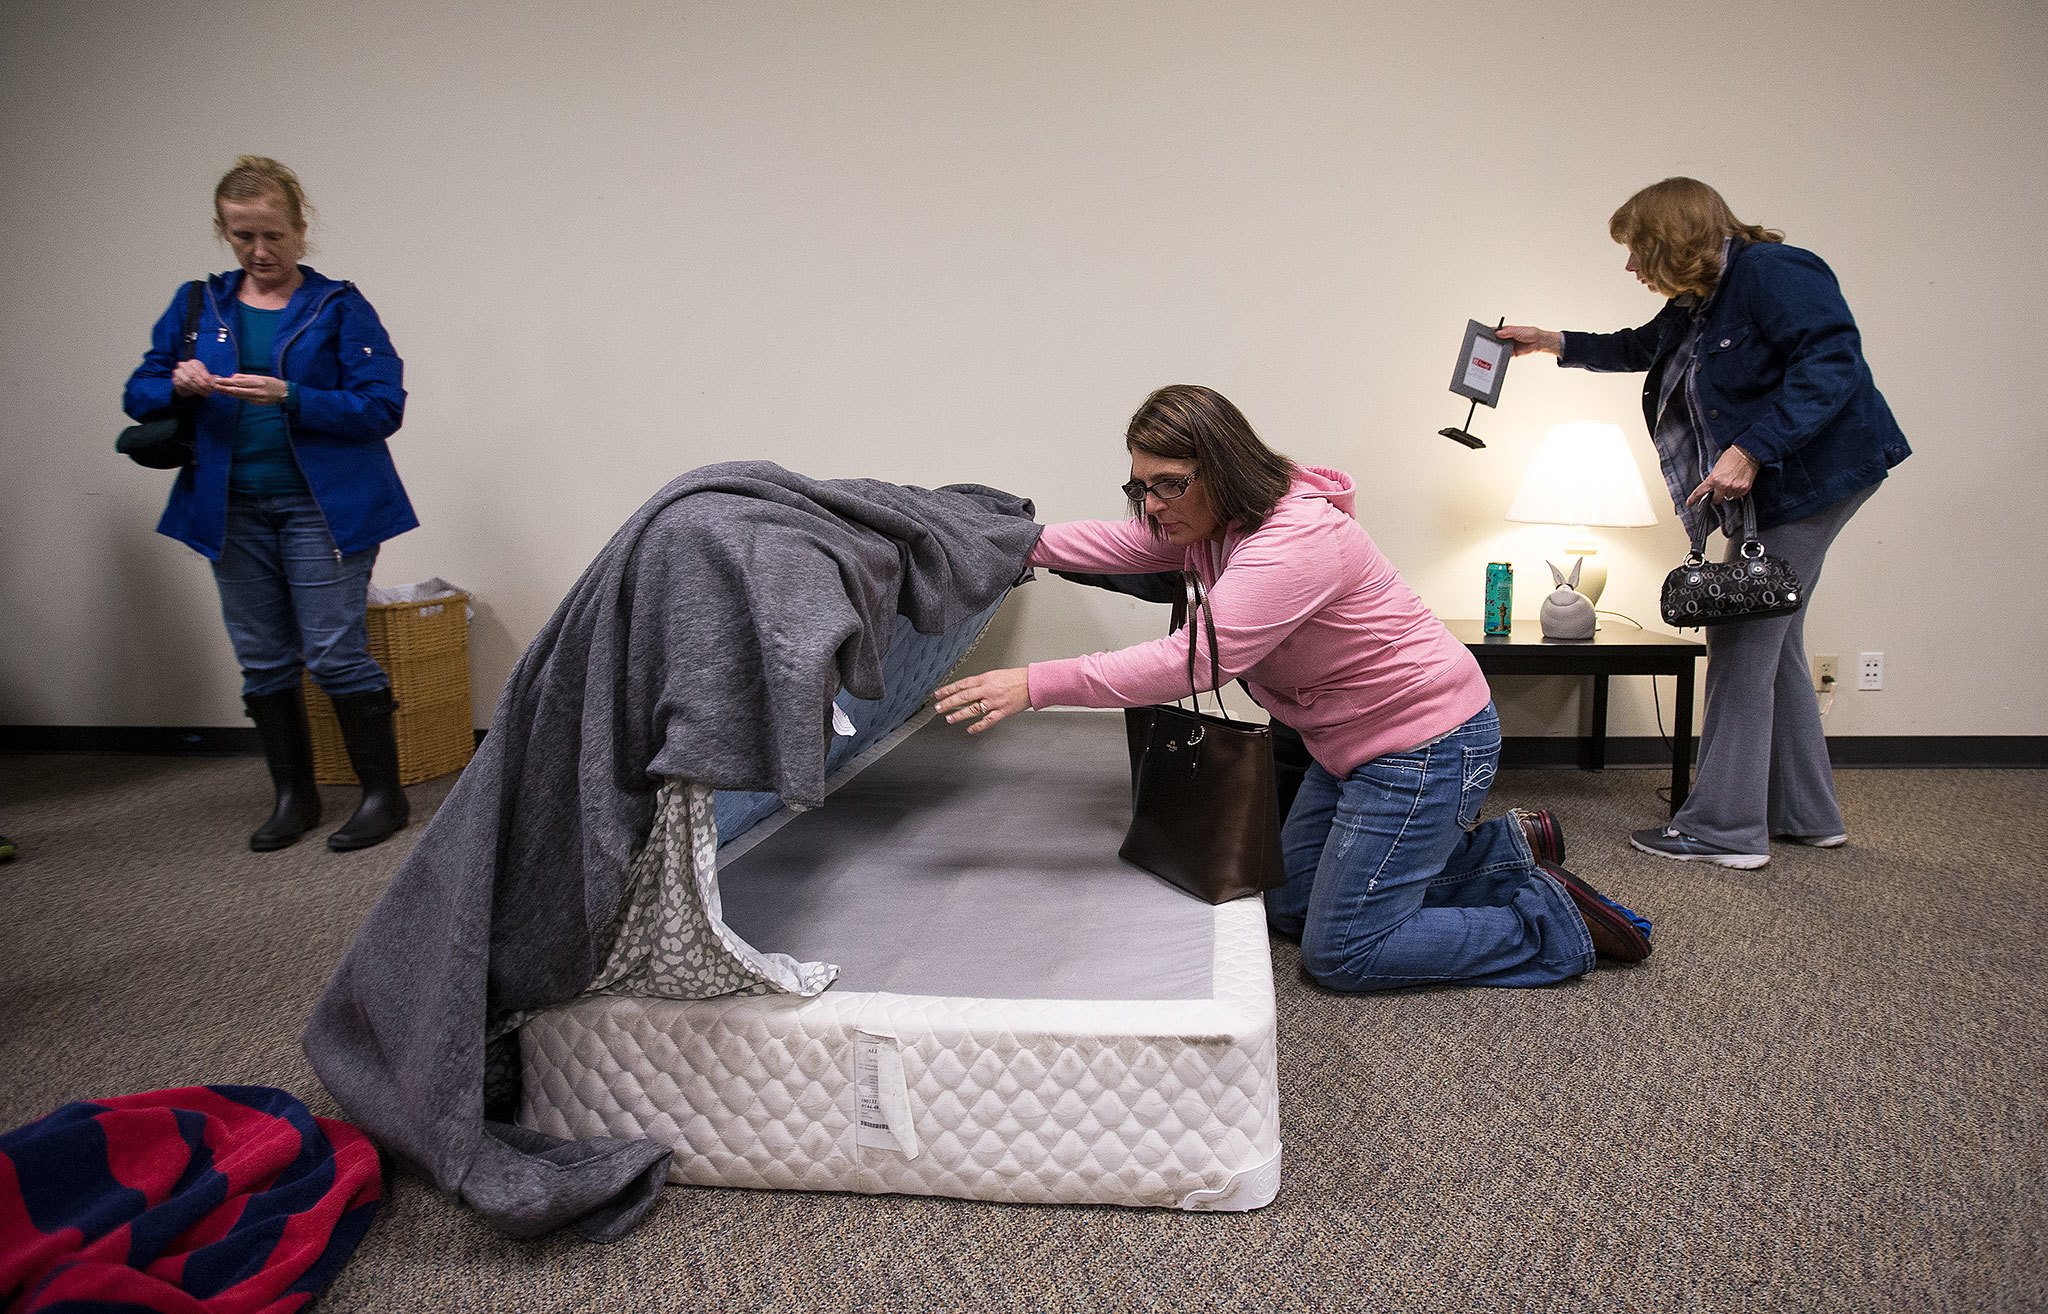 Tracy Van Beek lifts up a bed as she and other parents look for hidden drugs in a model girl’s bedroom at Weston High on Thursday, Jan. 19, in Arlington. Van Beek and other parents and kids attended the “Not in My House!” event, put on by the Arlington Drug Awareness Coalition. (Andy Bronson / The Herald)